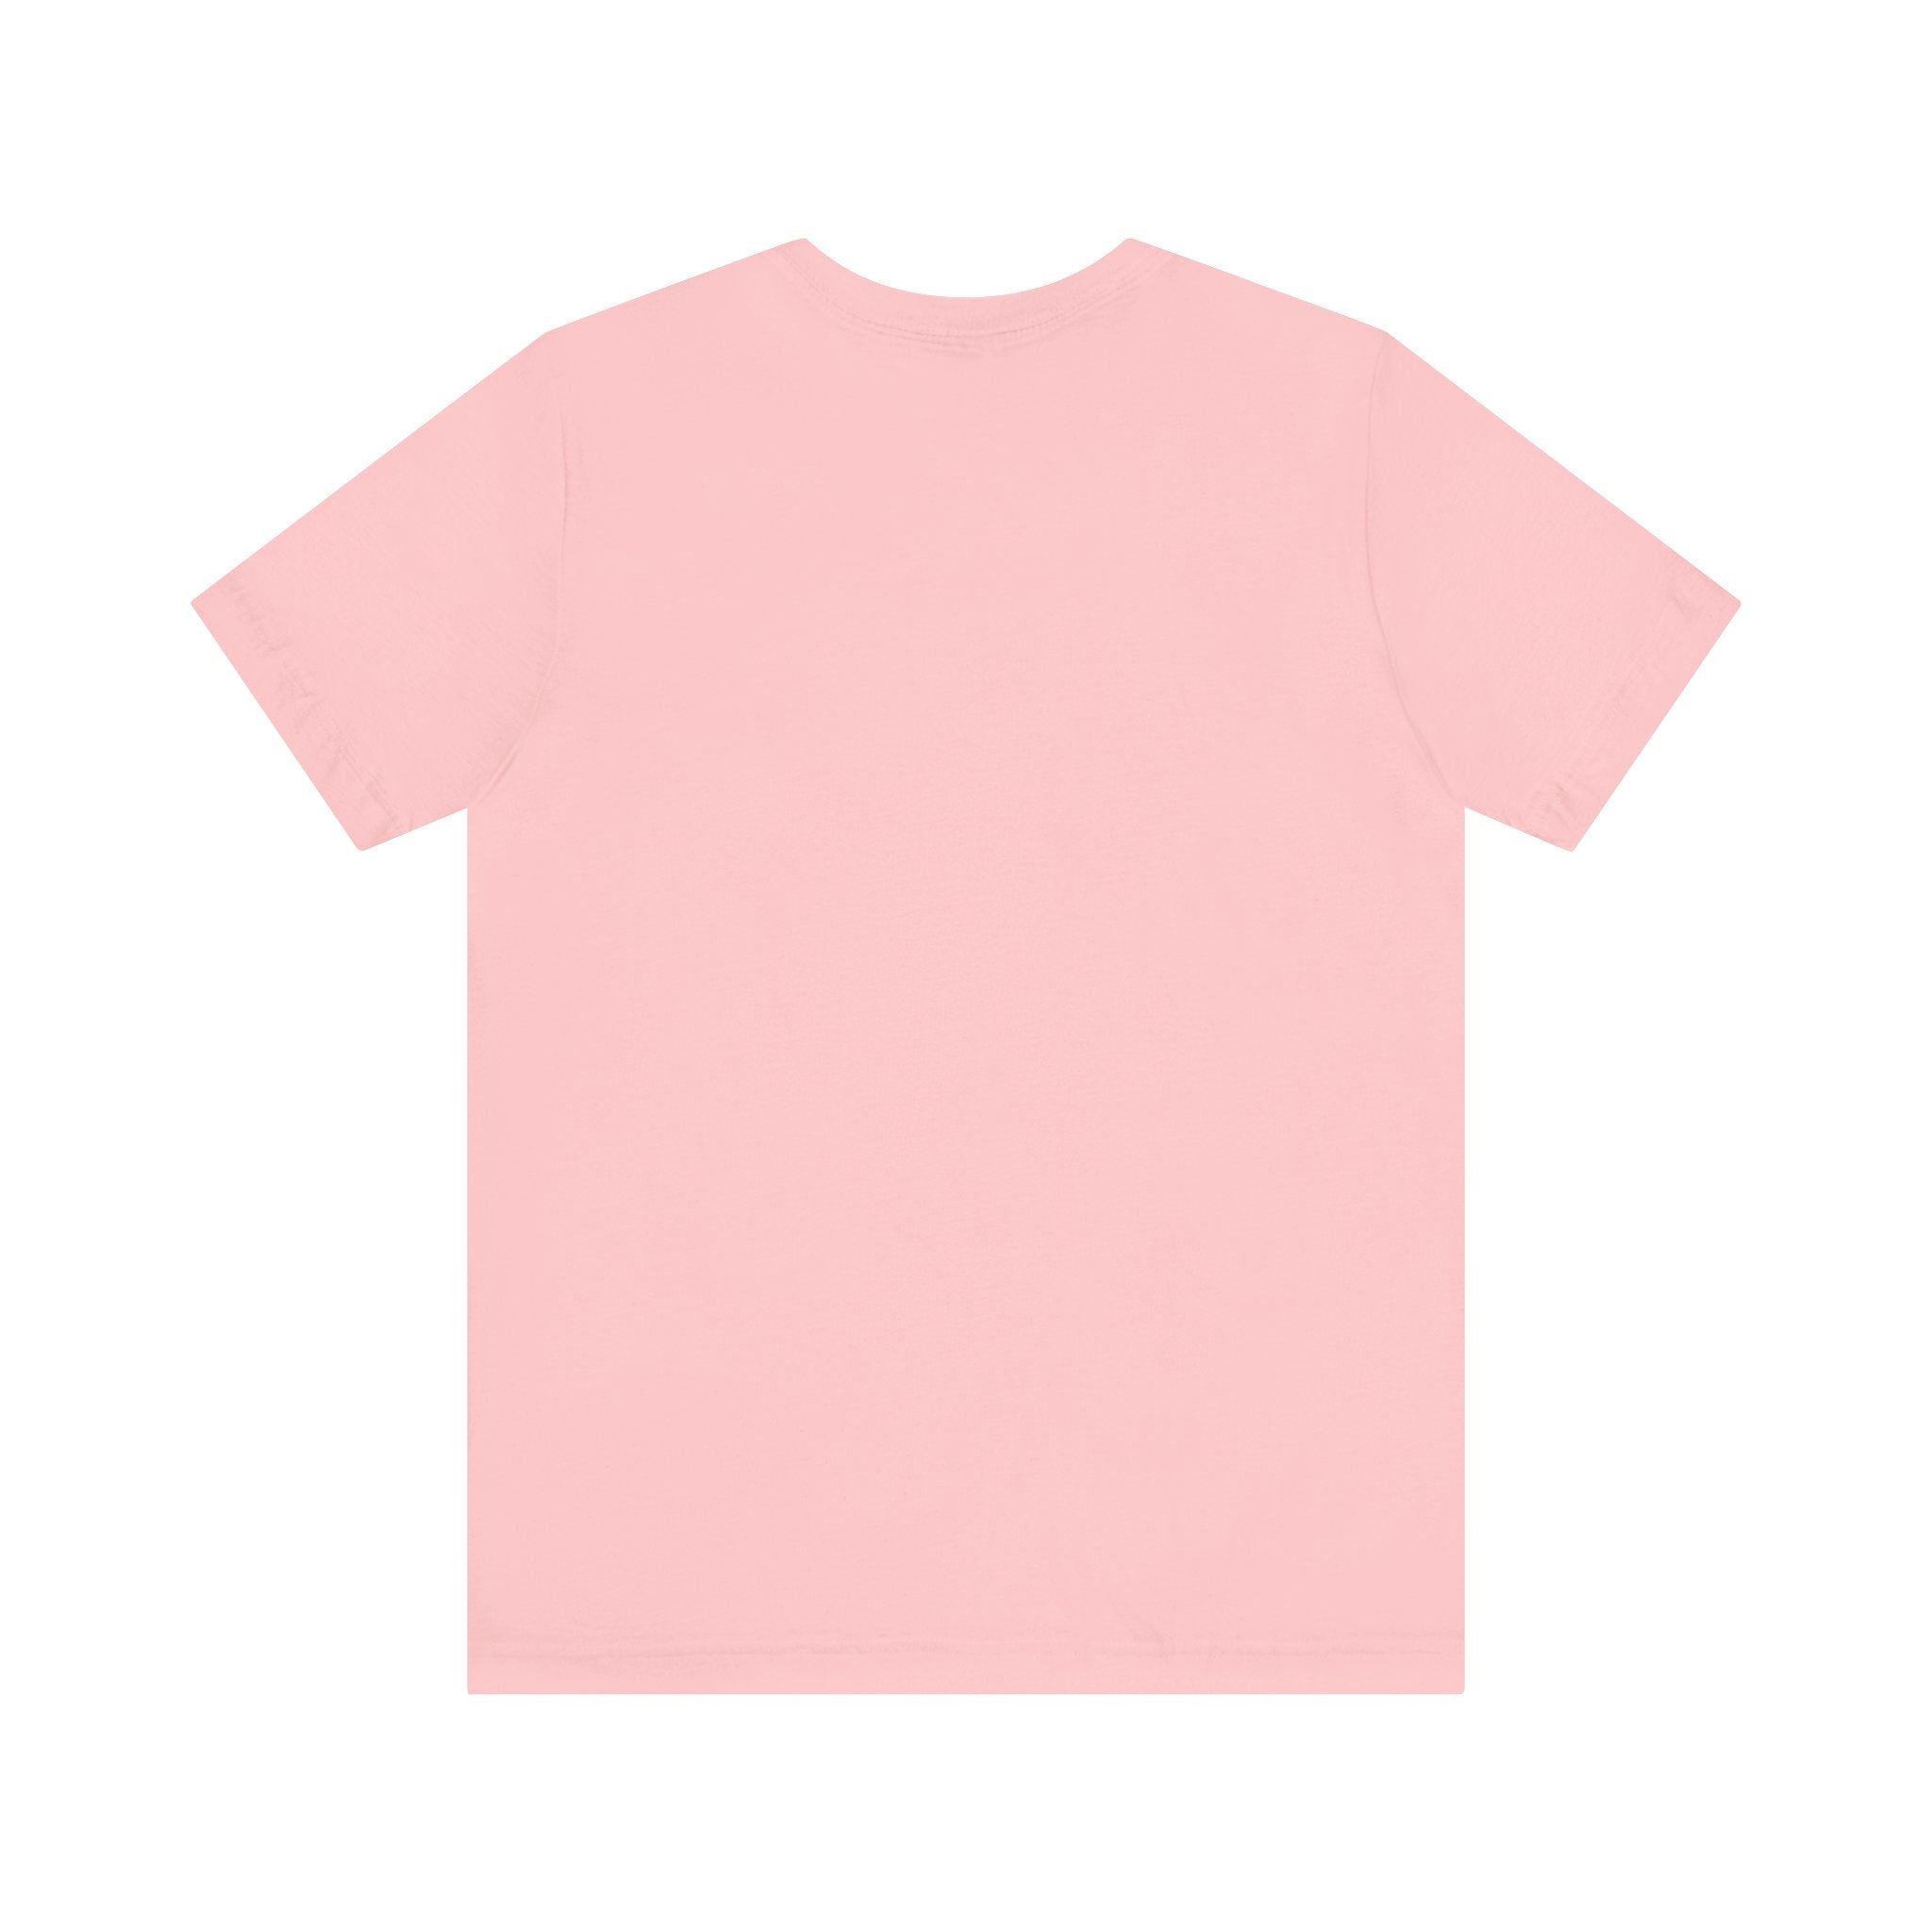 Pink t-shirt with white logo printed on the front - Be Amazing - Bella & Canvas - Soulshinecreators - Unisex